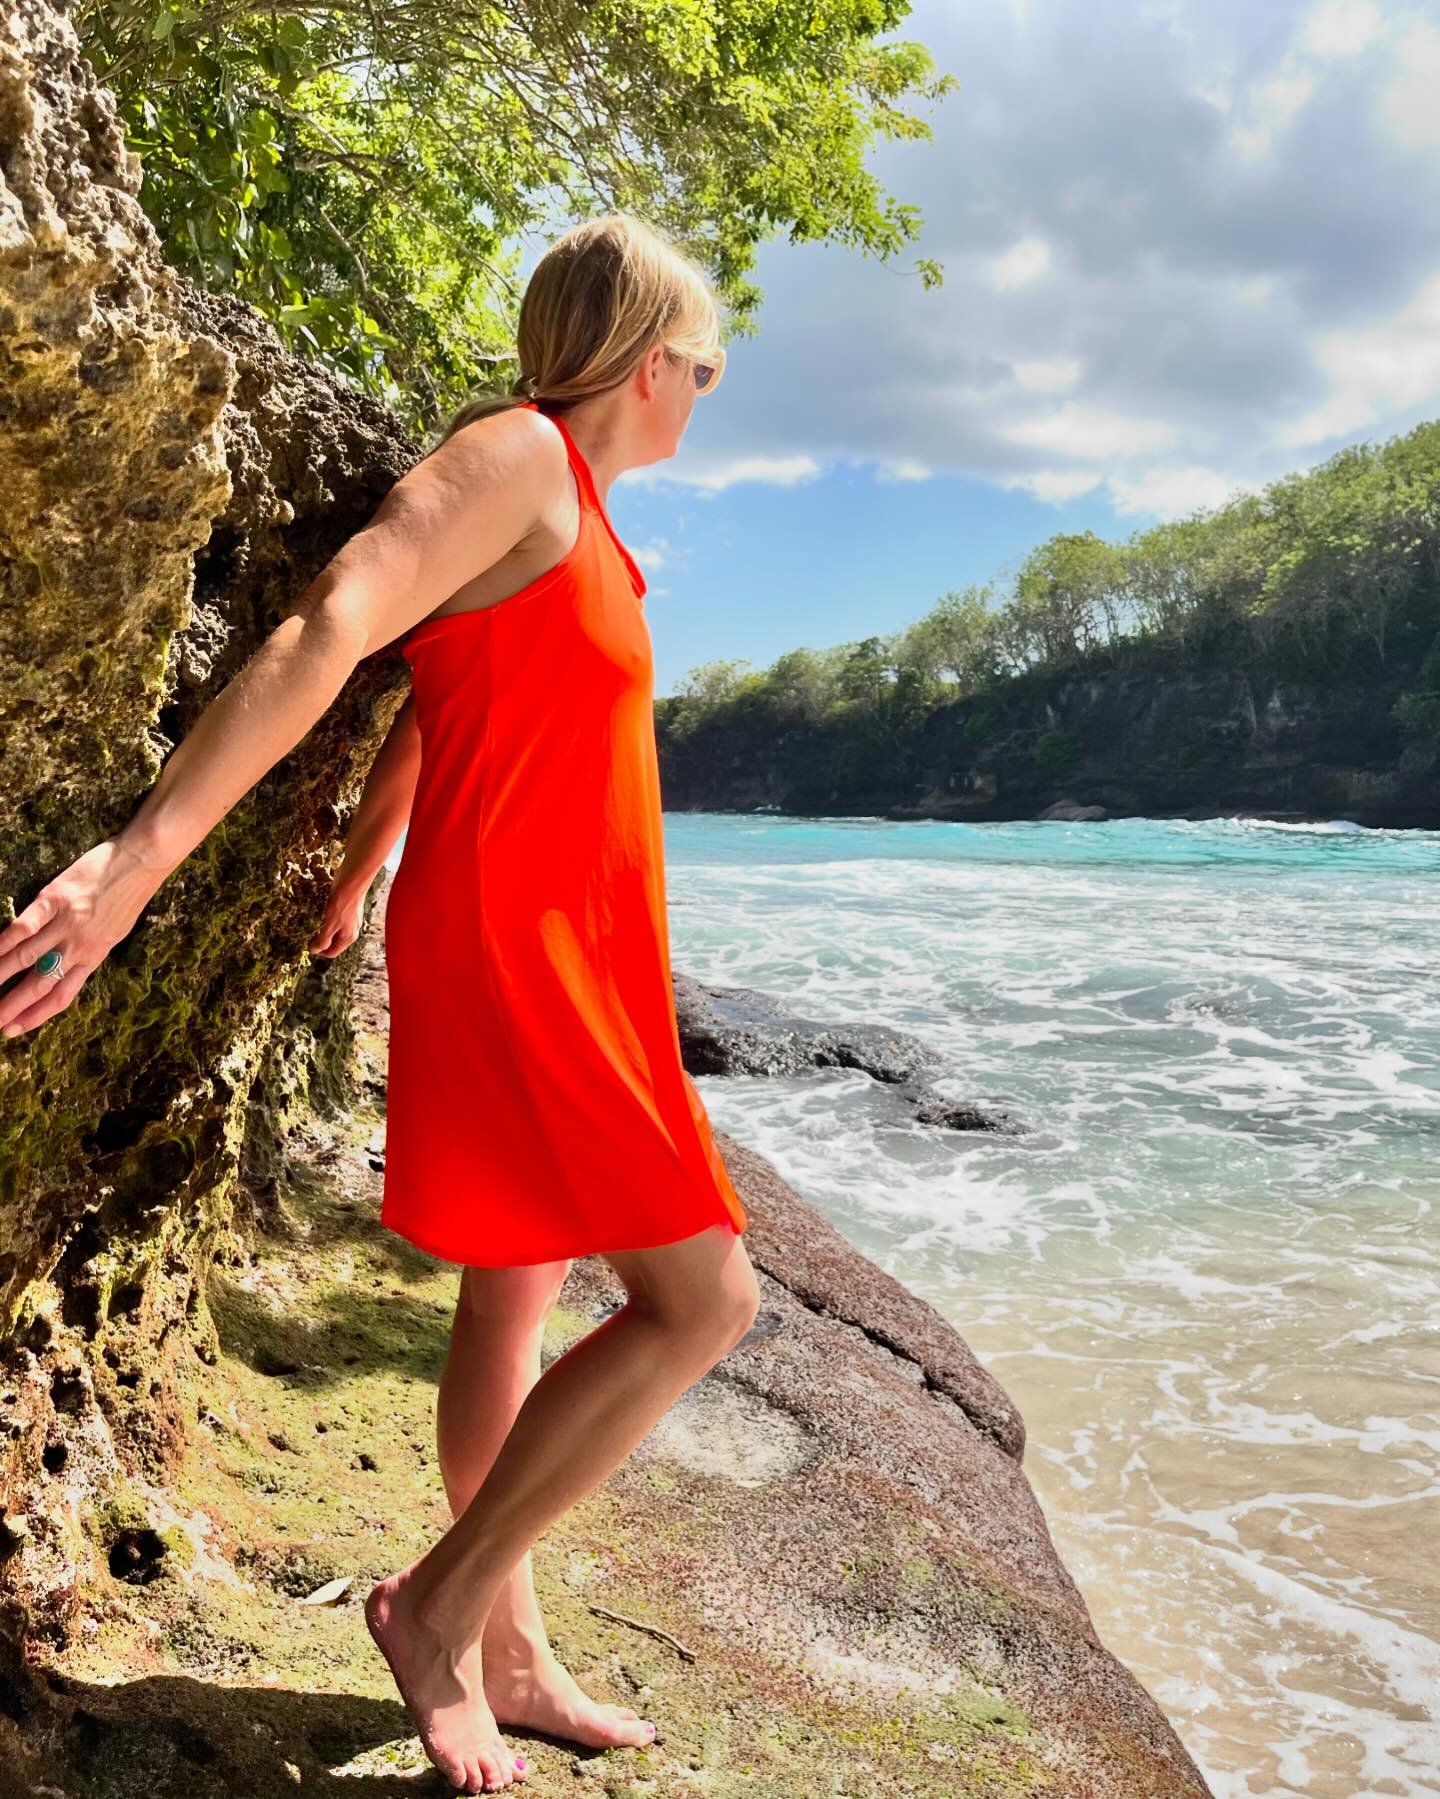 #TBT to Bali nearly a year ago. And the &ldquo;Bali Dress.&rdquo; Working on my Summer 2024 Road Trip wardrobe. A different look for this year for a different type of trip ahead. #hiddenbeach

Nylon spandex fabric used to create dress from @fabricmer